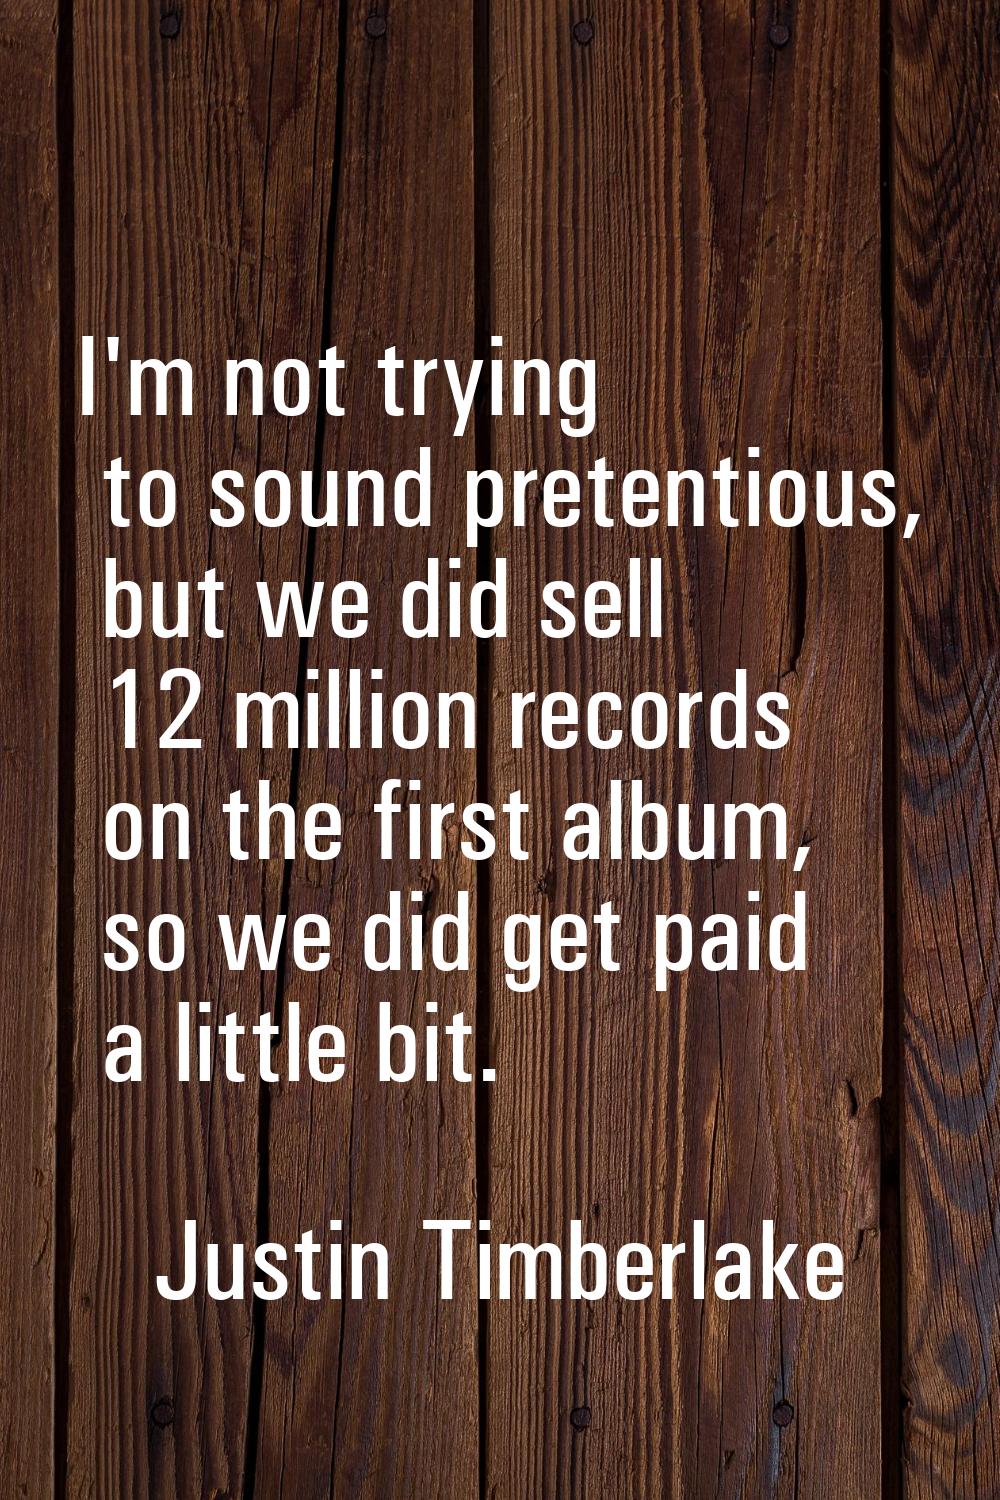 I'm not trying to sound pretentious, but we did sell 12 million records on the first album, so we d